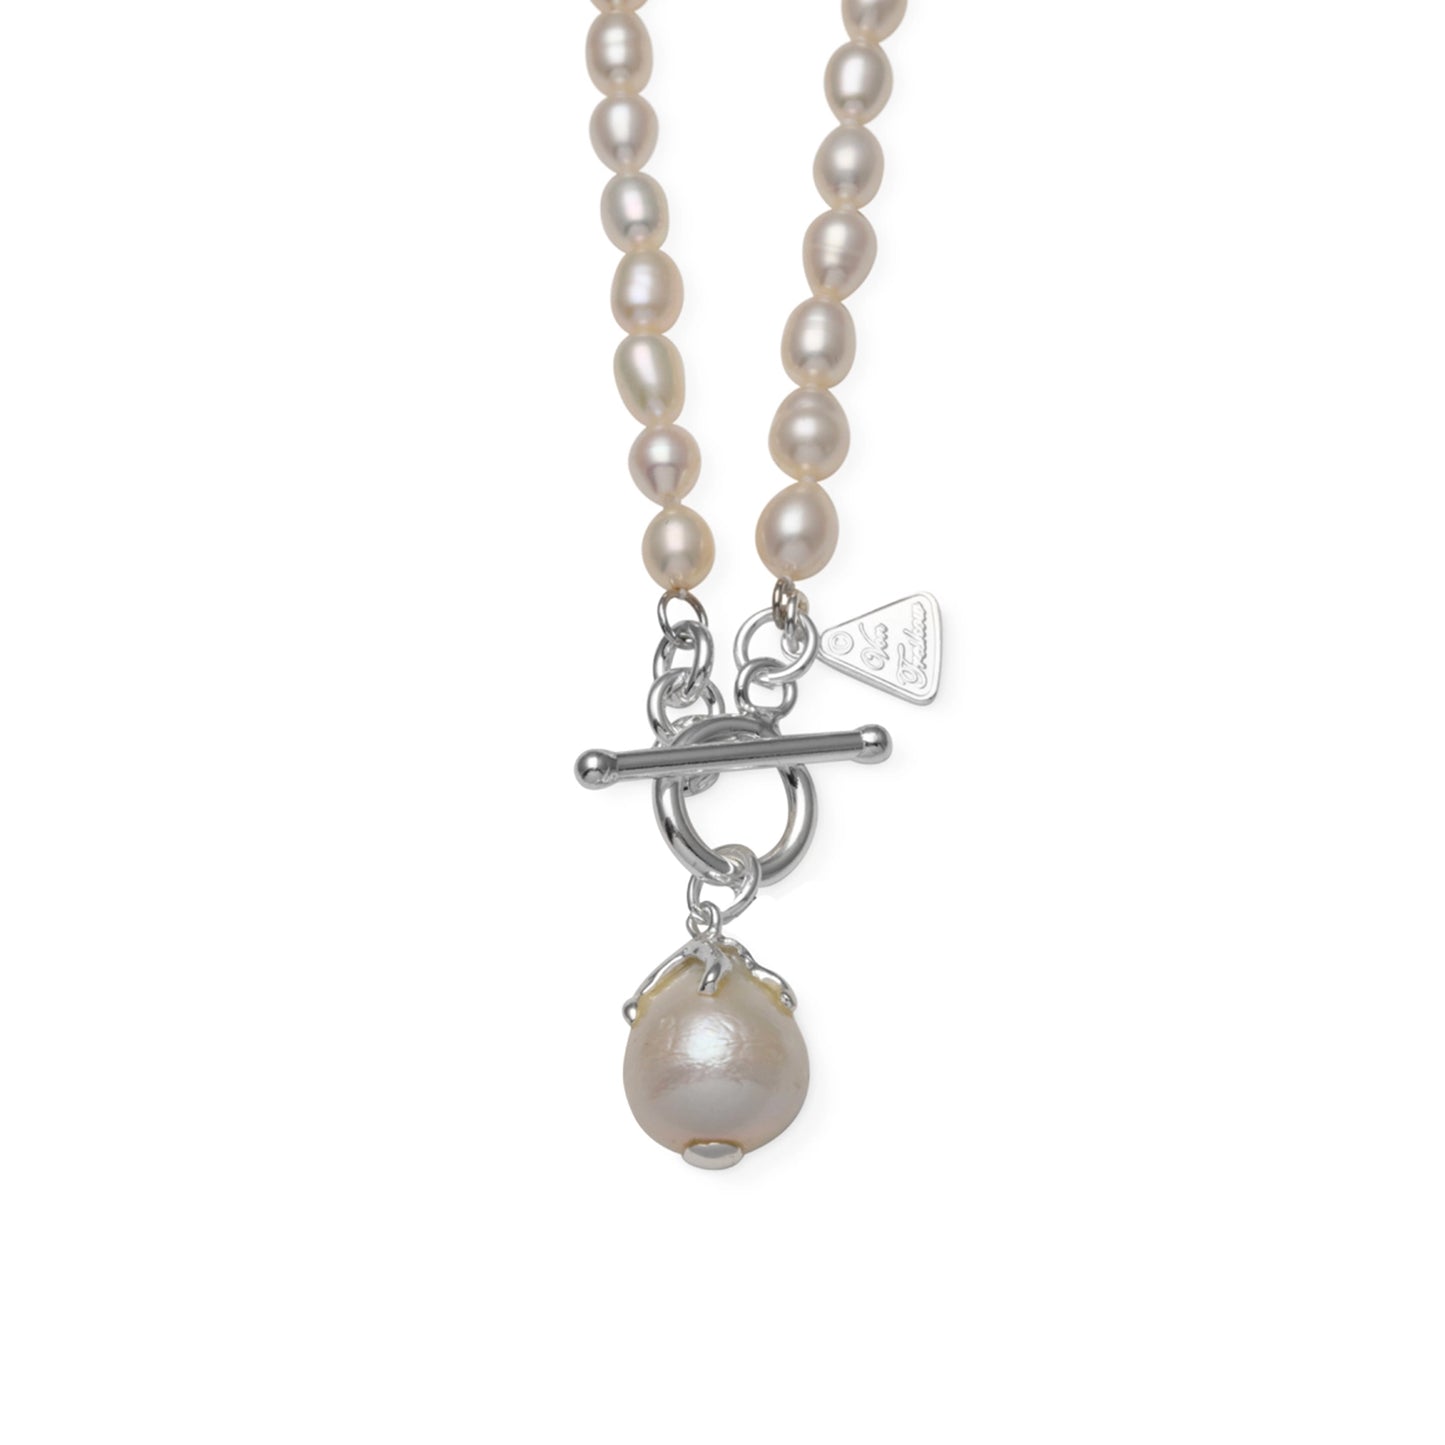 VT BAROQUE PEARL ON PEARL NECKLACE